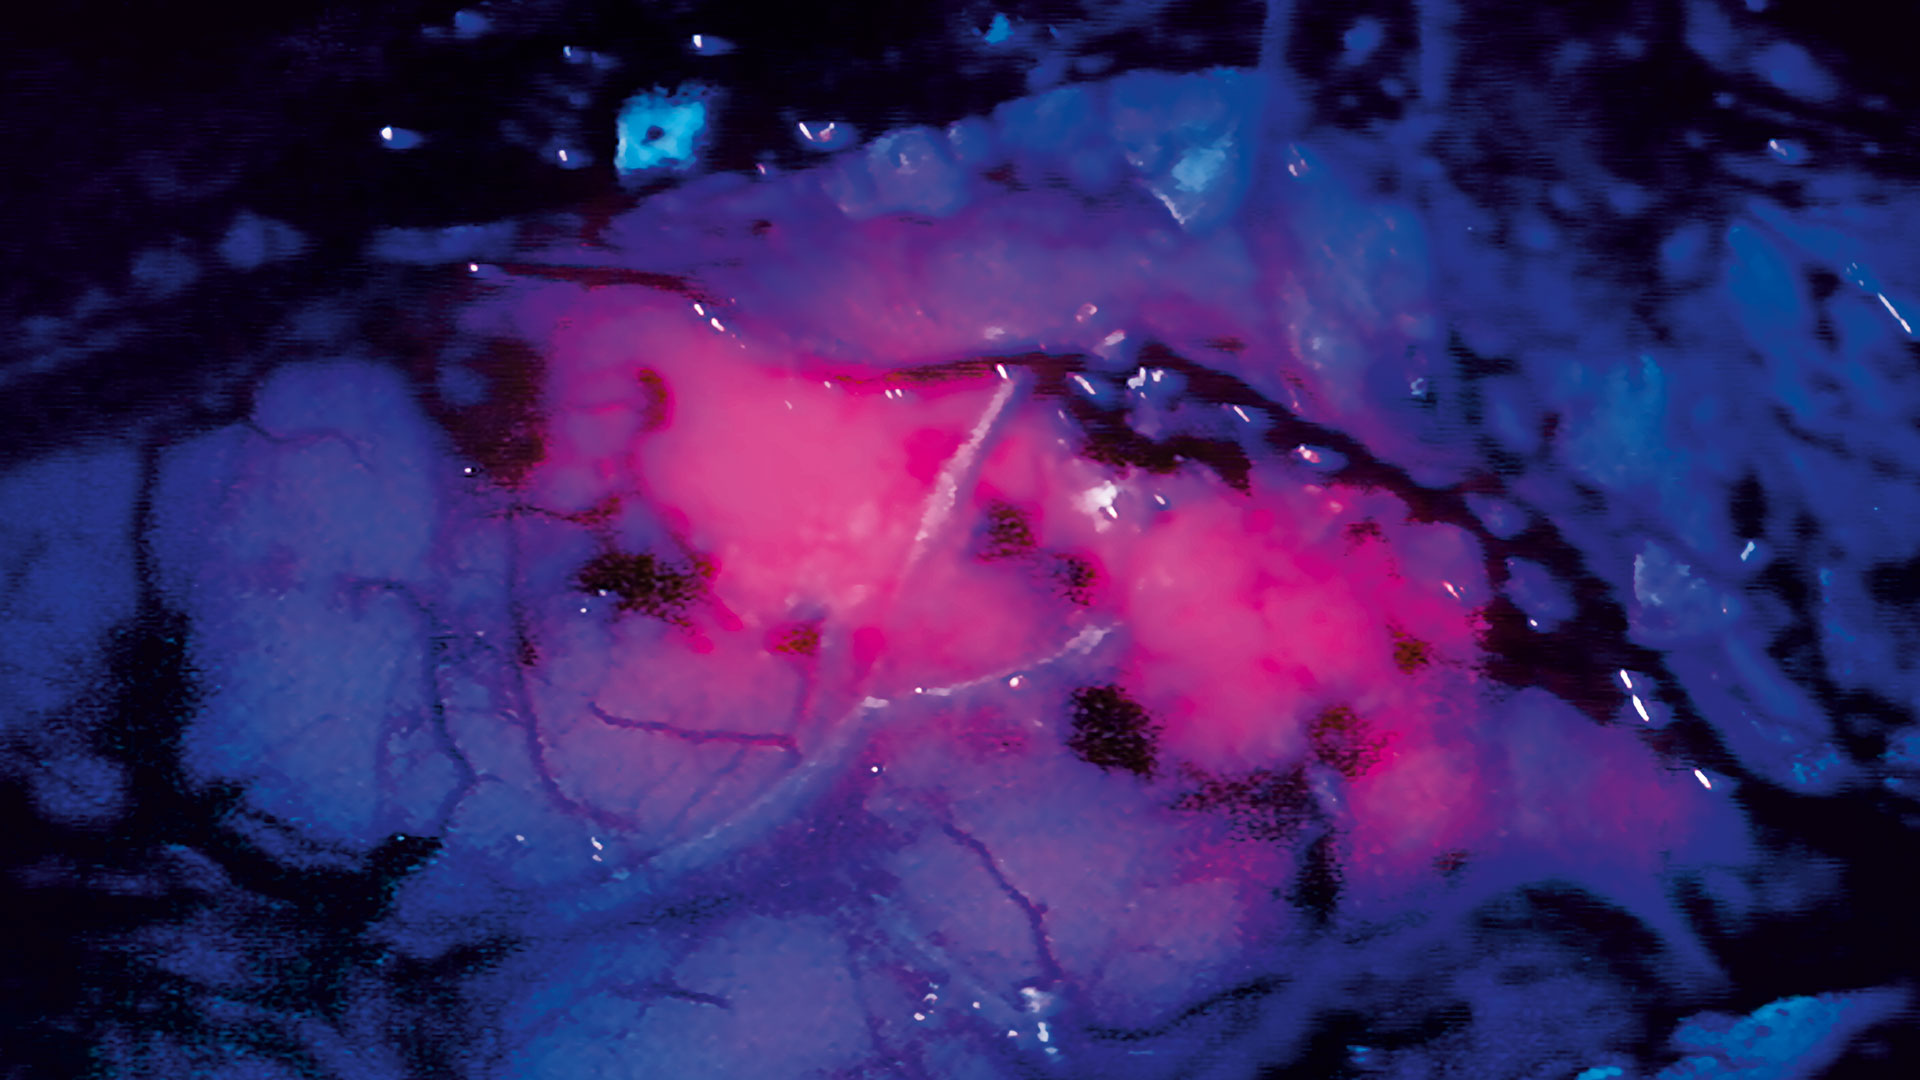 Depiction of a tumor under fluorescent light (BLUE 400 - the red areas indicate the tumor) and under normal lighting conditions (second image).